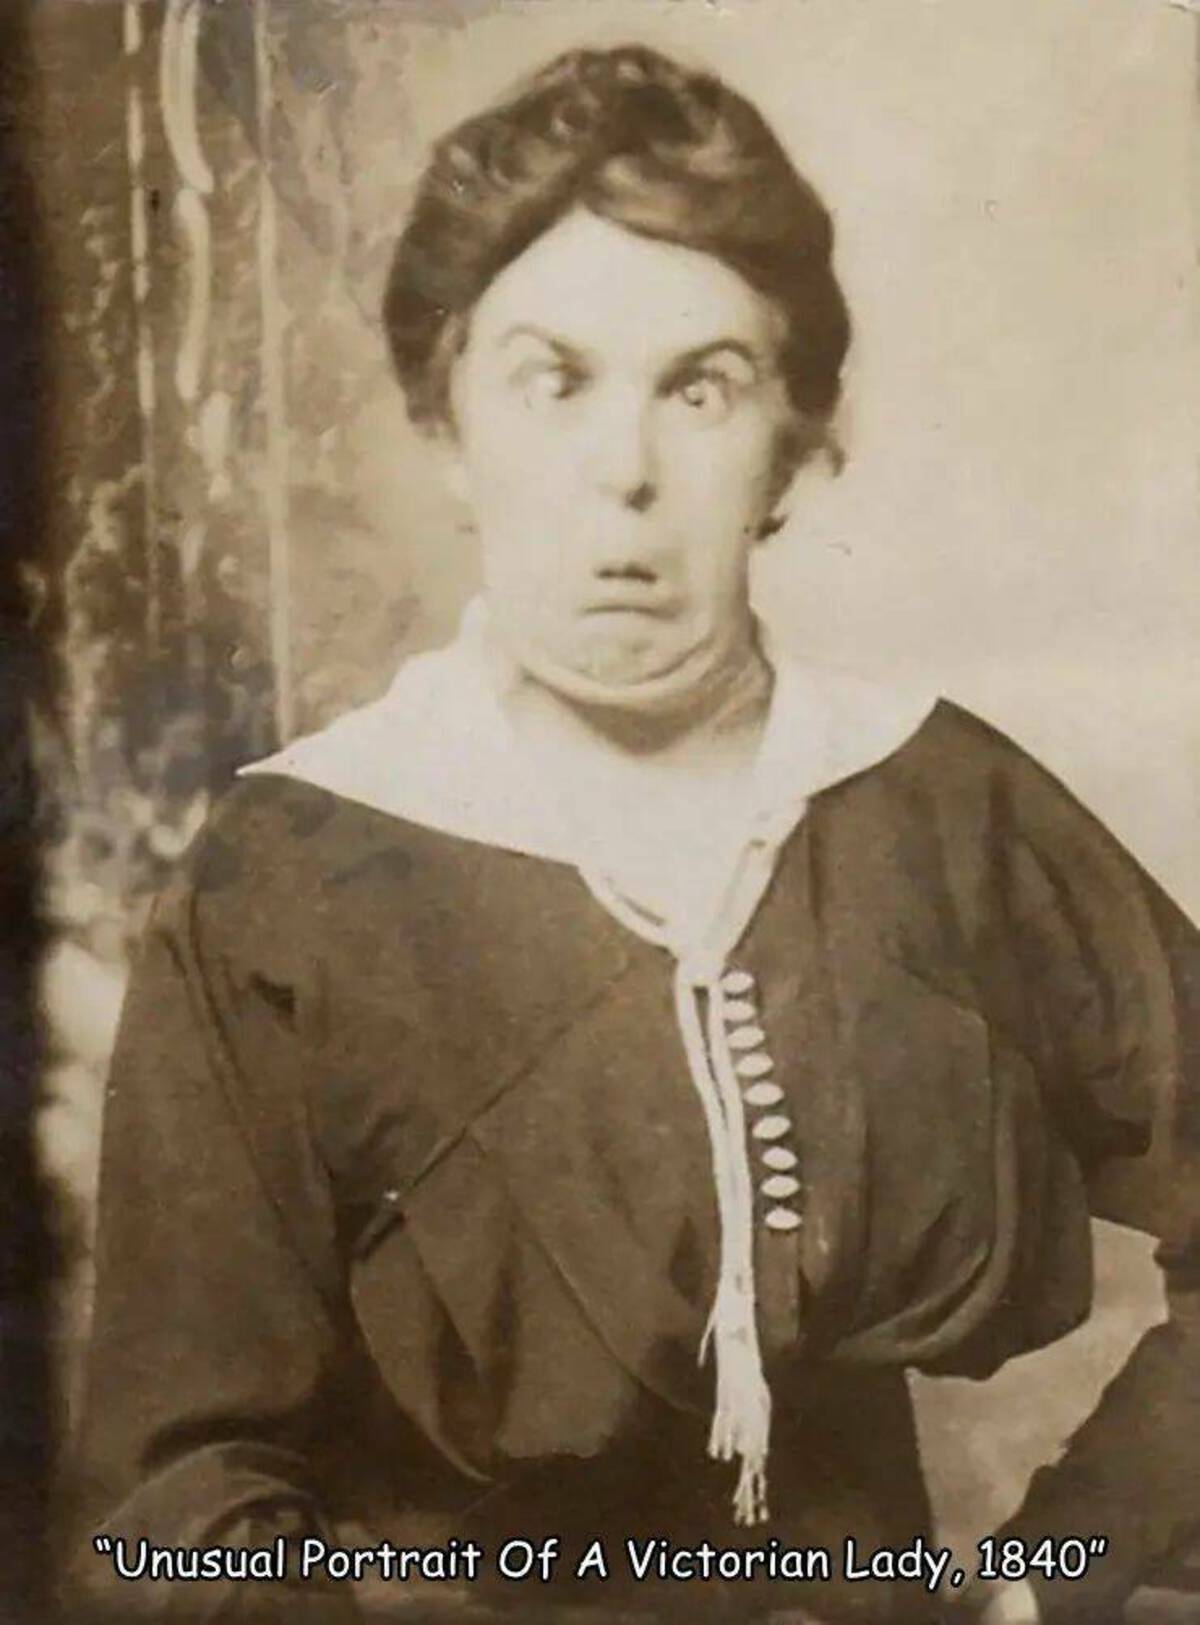 victorian old photographs - "Unusual Portrait Of A Victorian Lady, 1840"